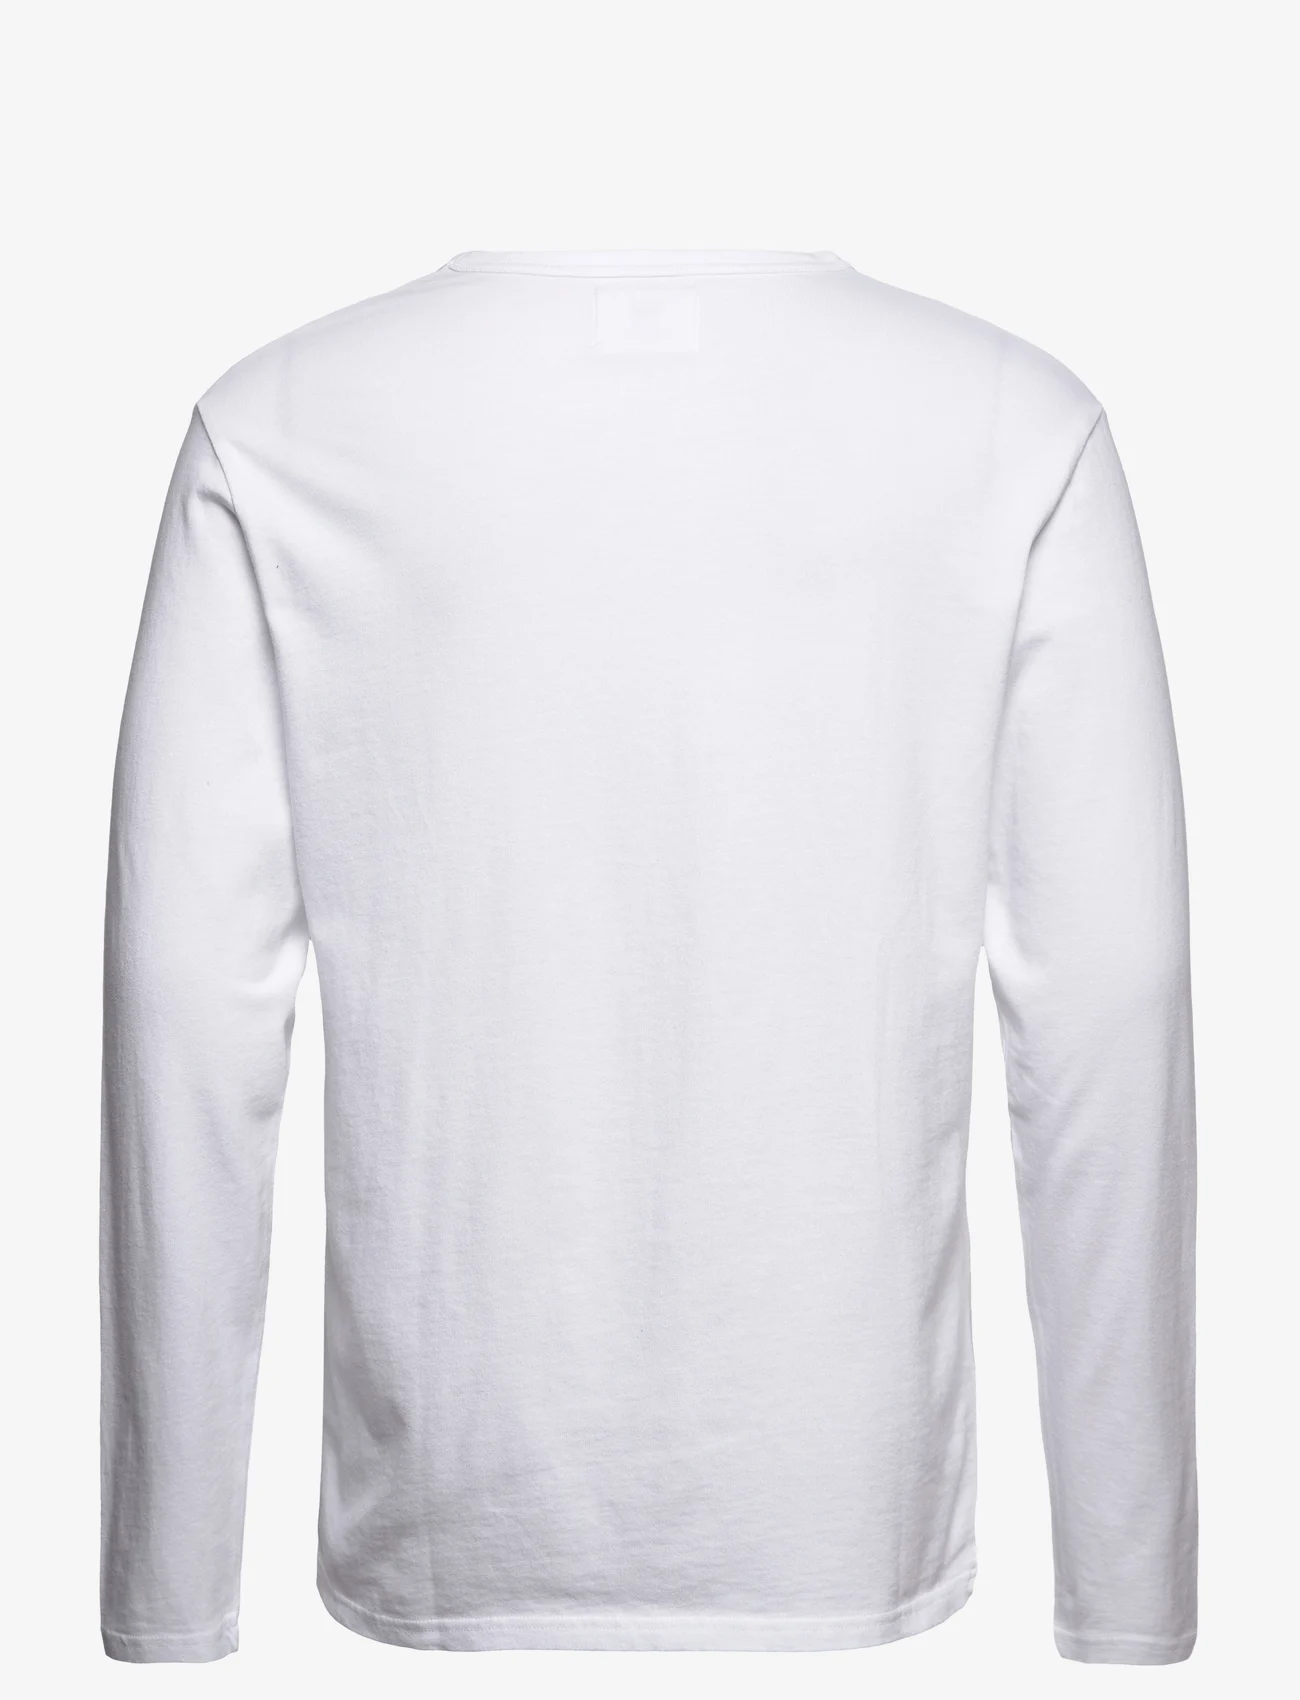 Double A by Wood Wood - Mel long sleeve - t-shirts - white/white - 1